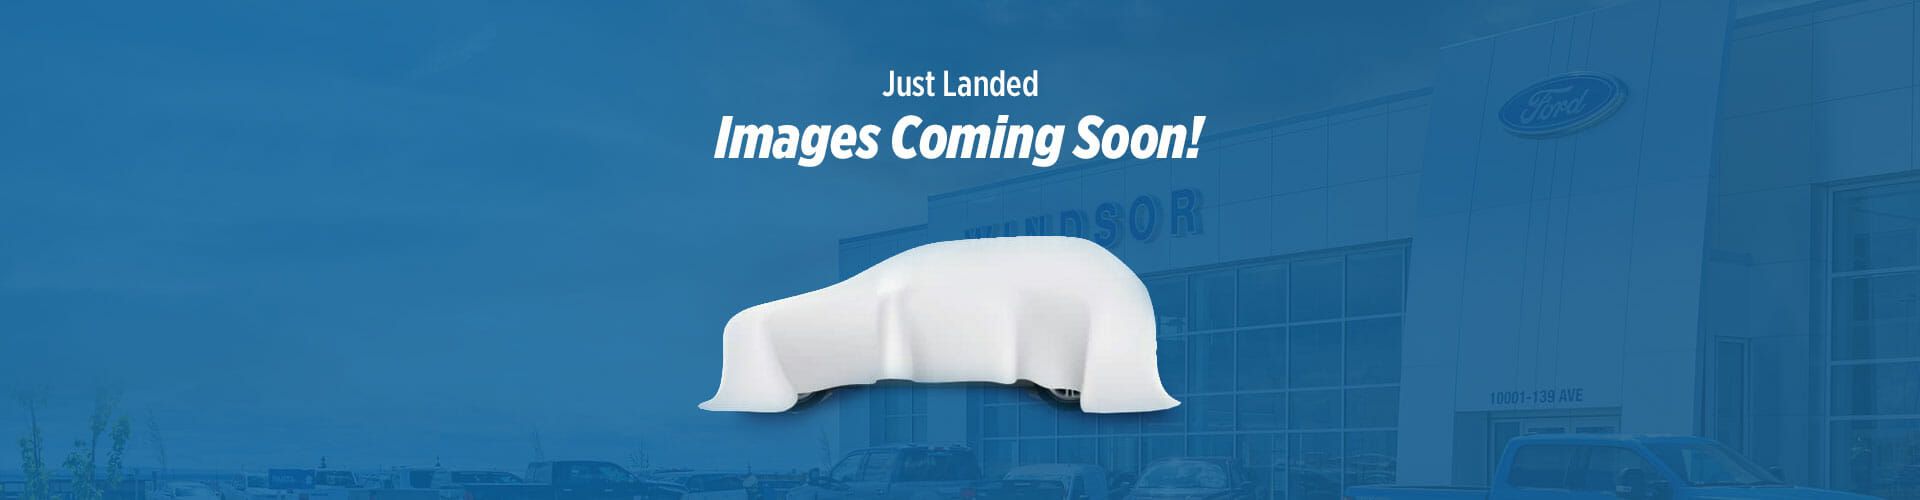 2016 Ford F-150 Photos Coming Soon